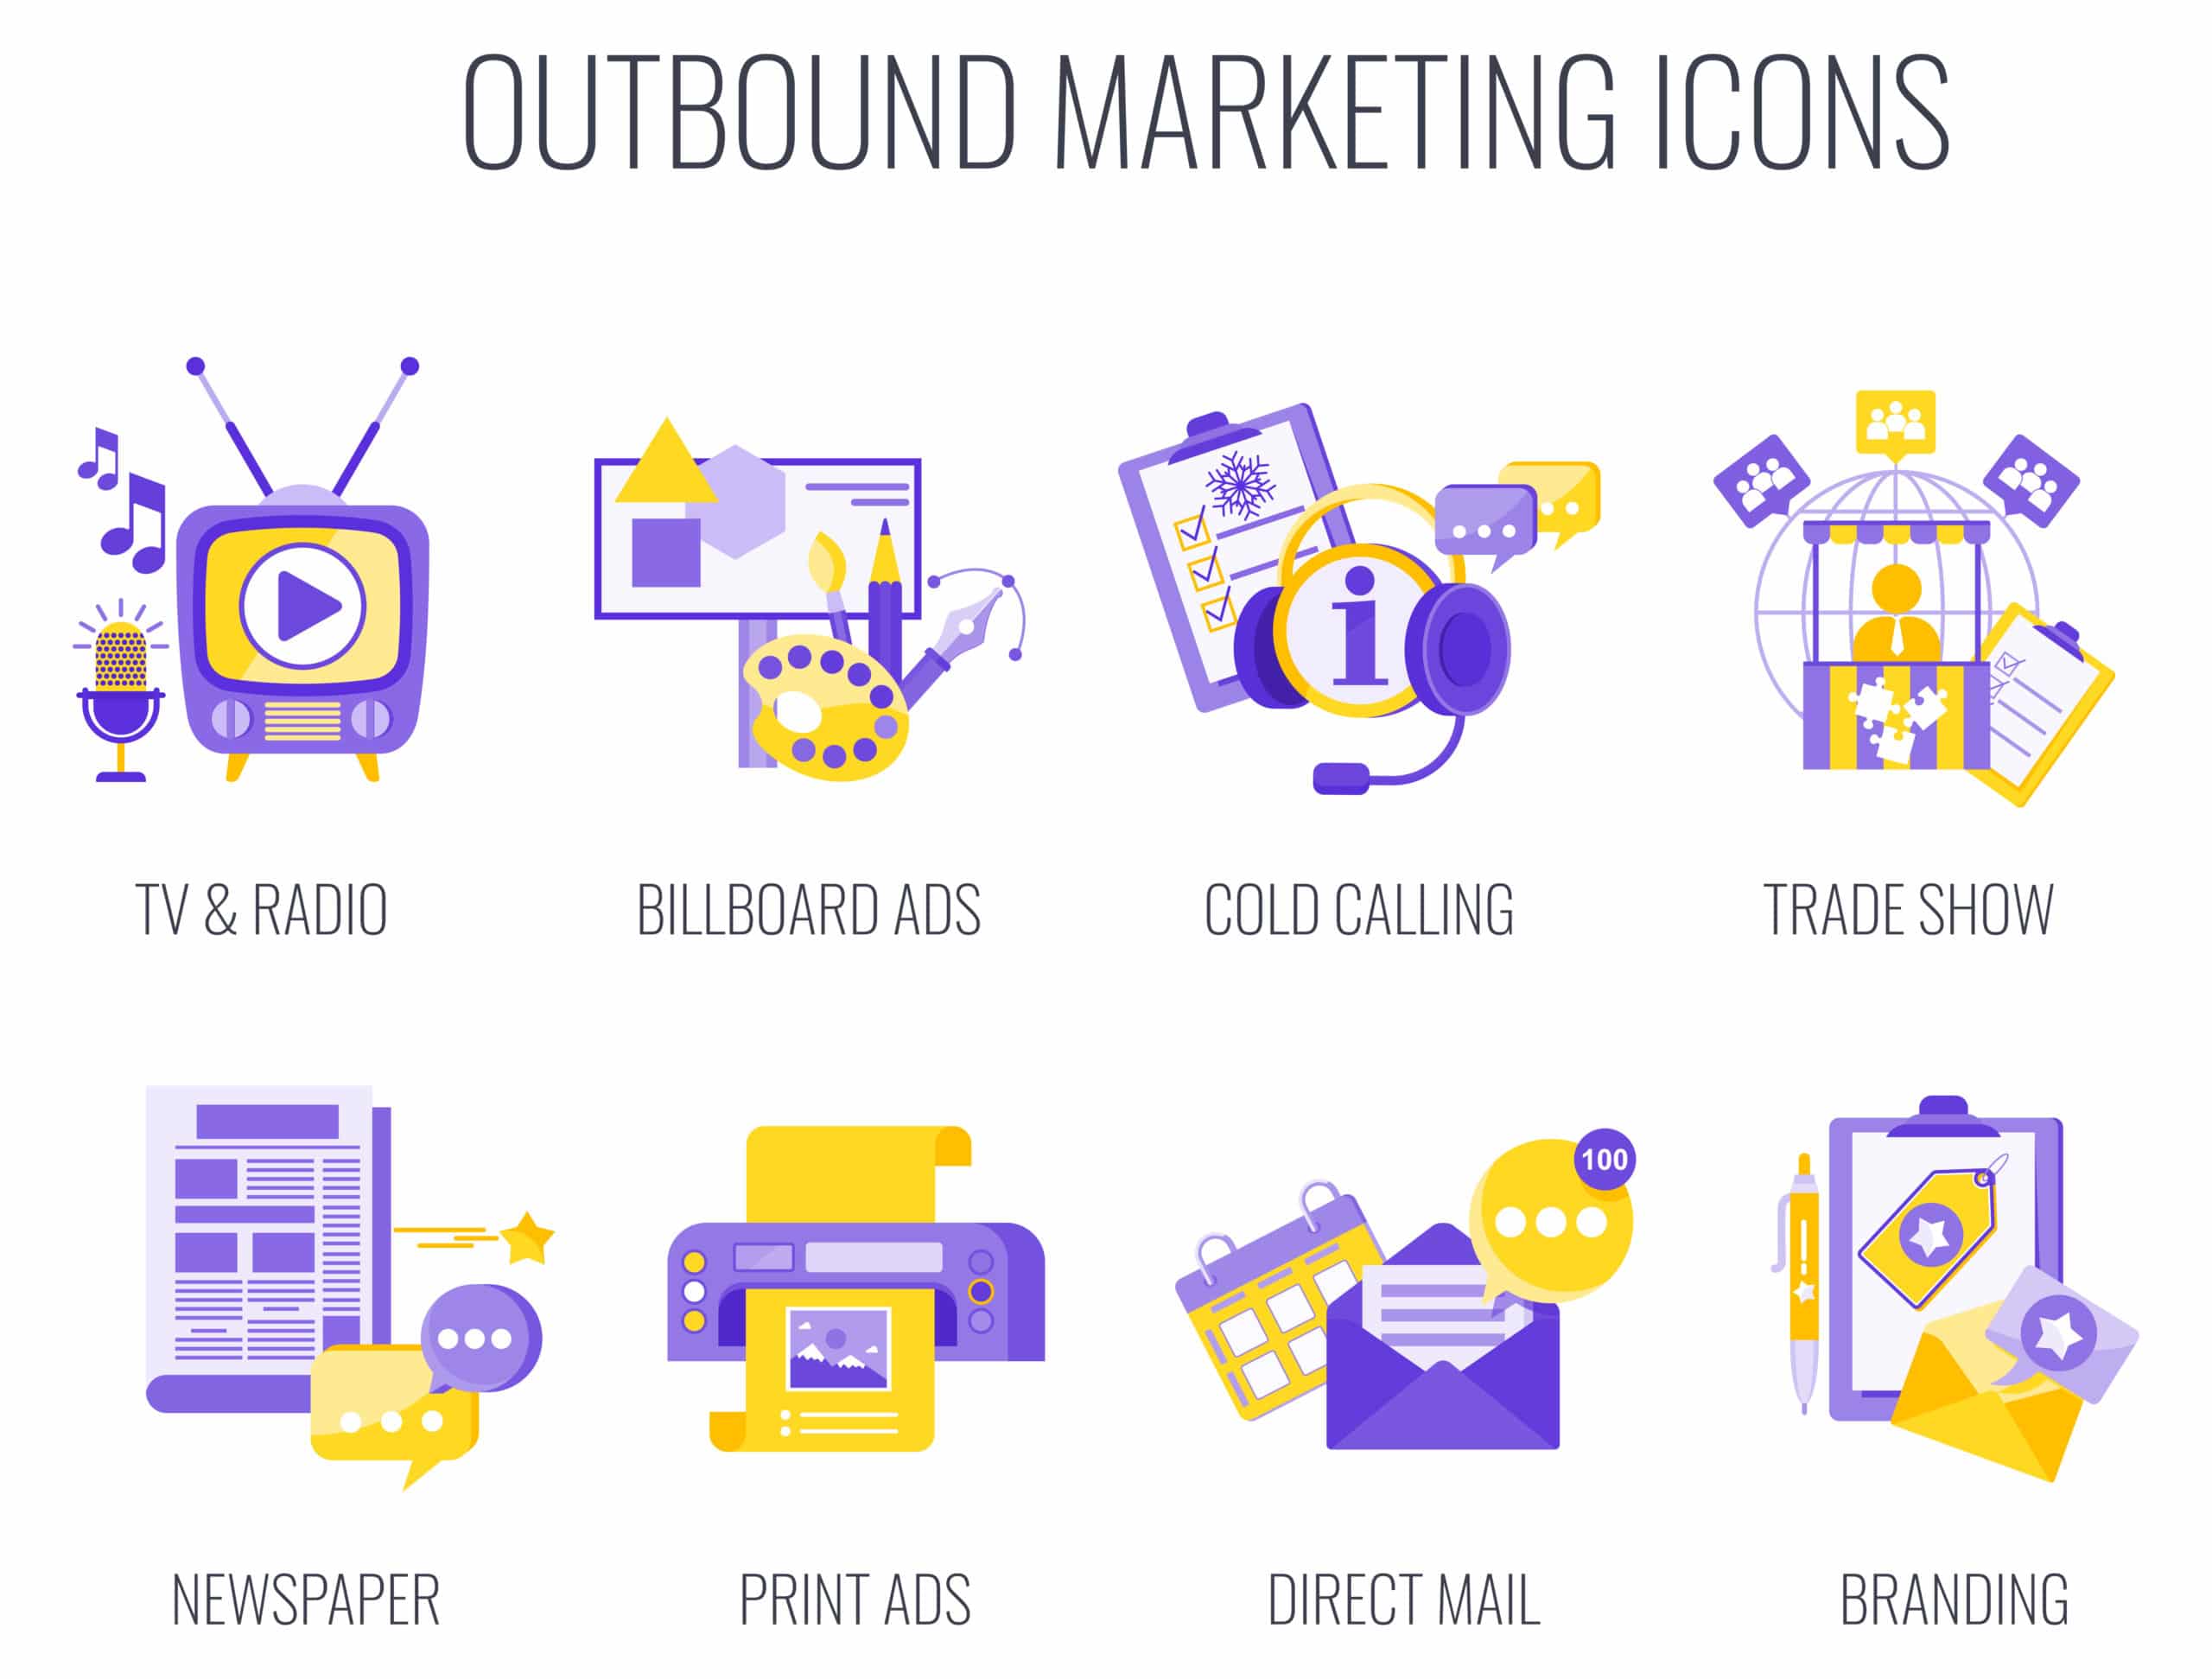 Outbound marketing - 10 tips